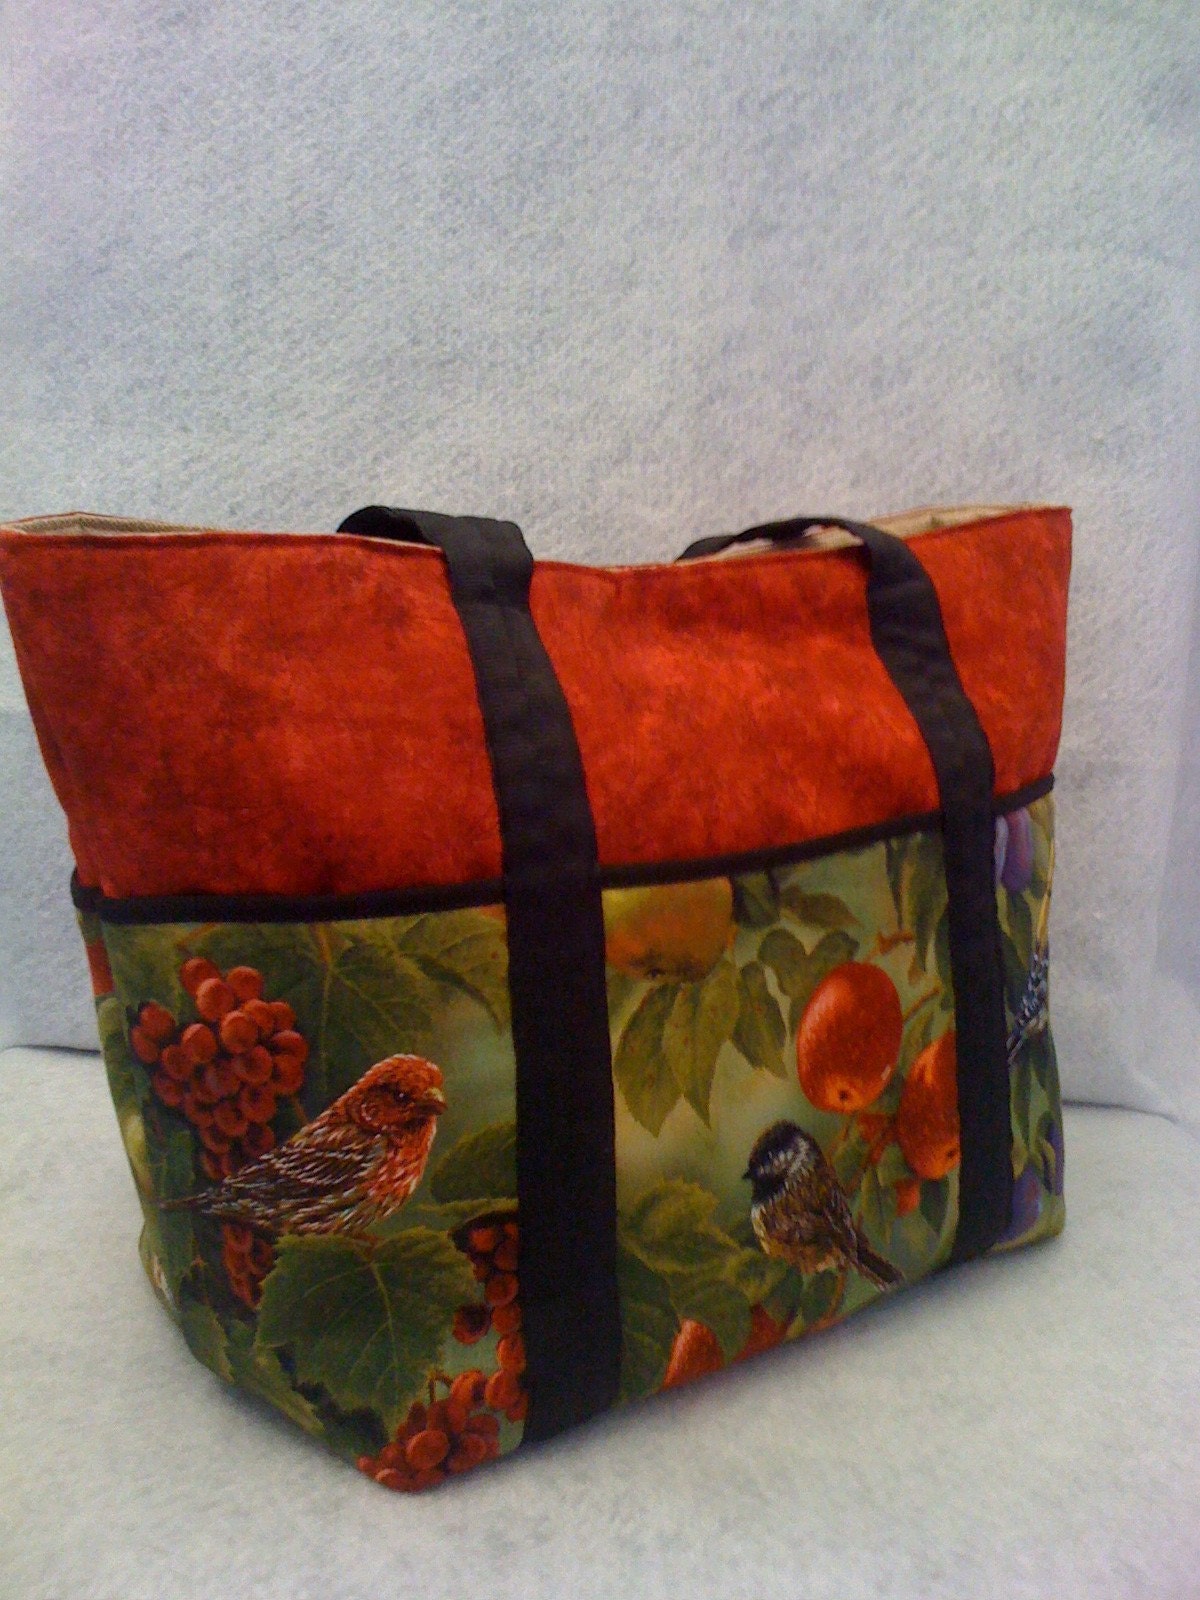 Tote Handbag with Finches in Vibrant Colors